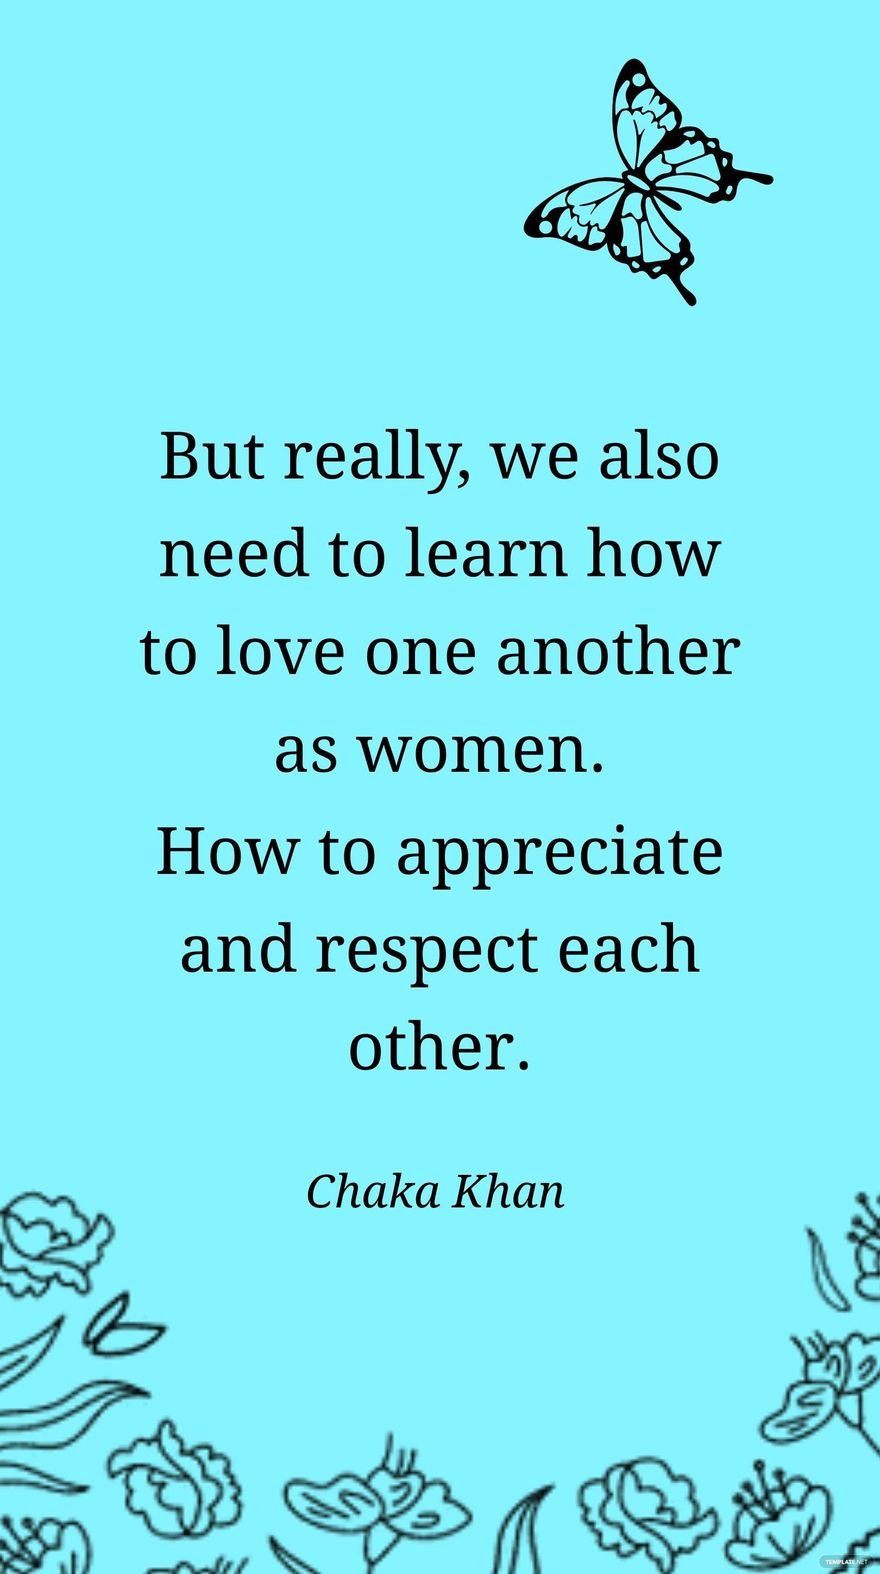 Free Chaka Khan- But really, we also need to learn how to love one another as women. How to appreciate and respect each other. in JPG